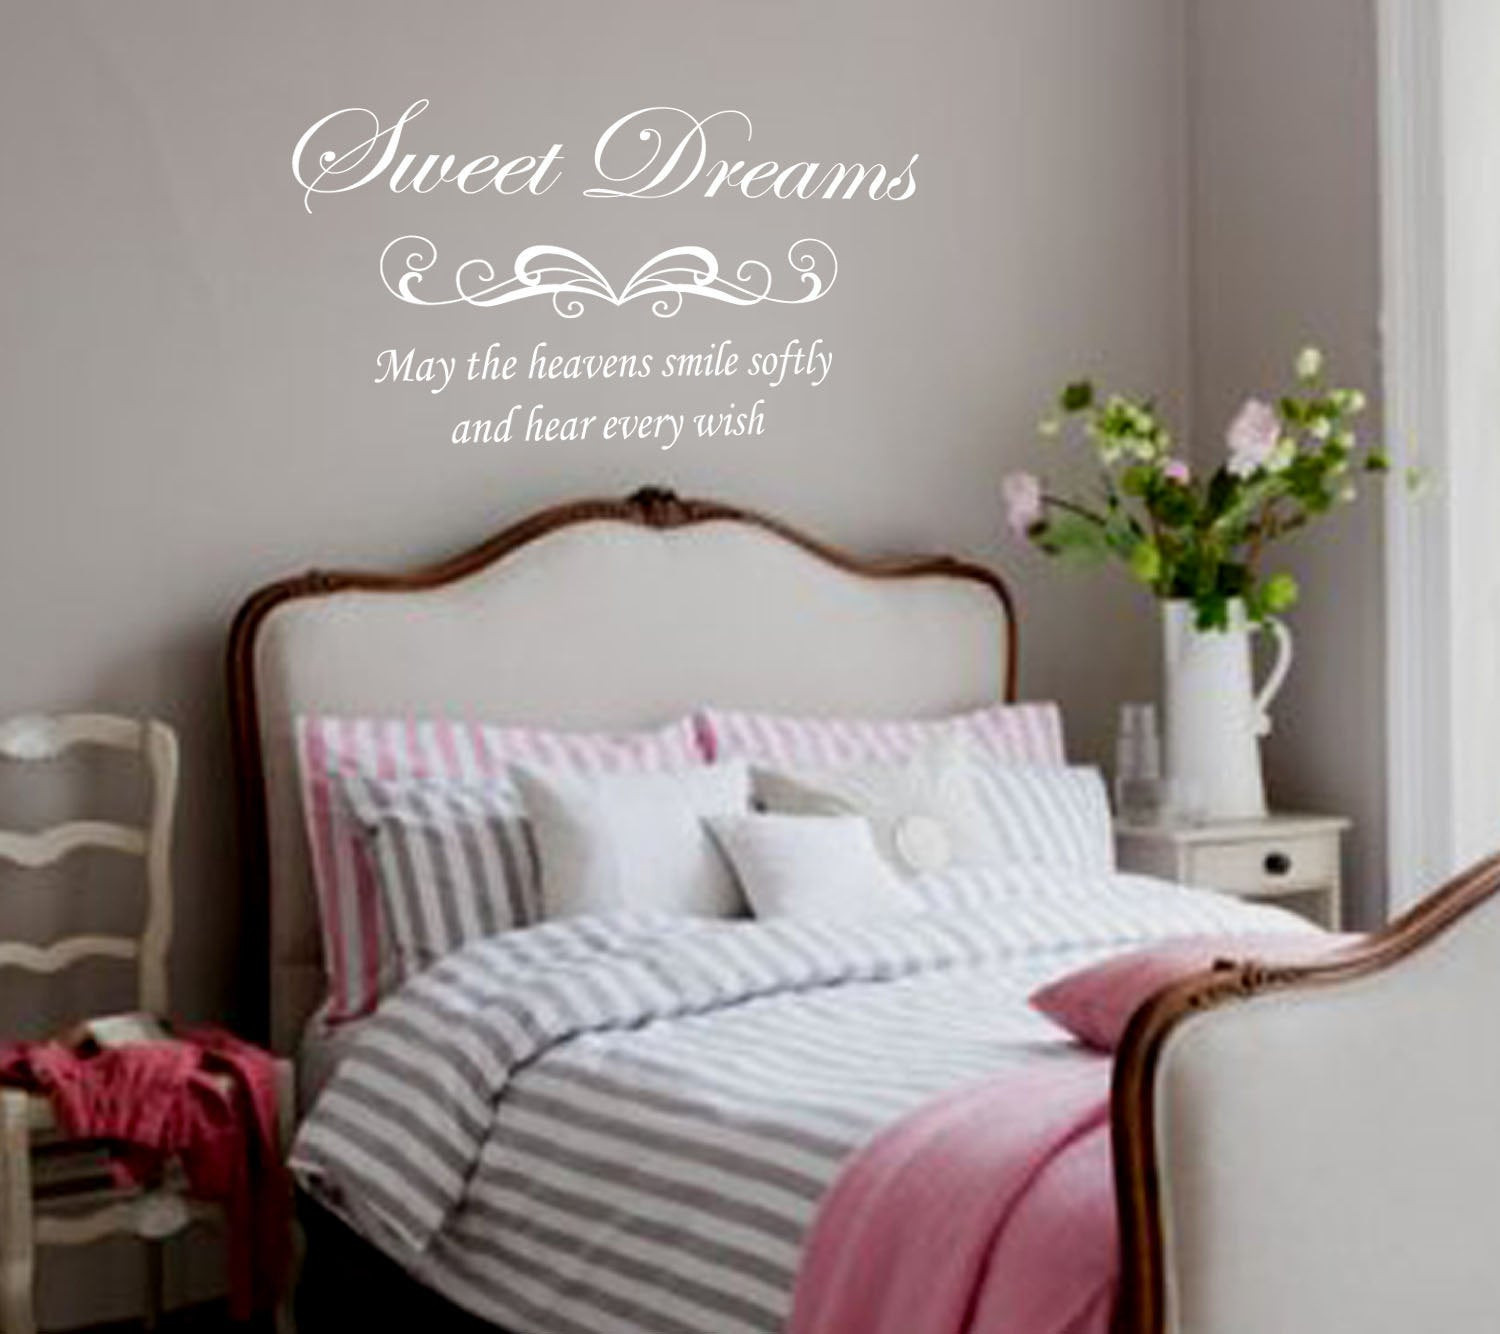 Wall Decal Quotes For Bedroom
 Bedroom Wall Decal Sweet dreams Removable Vinyl Lettering